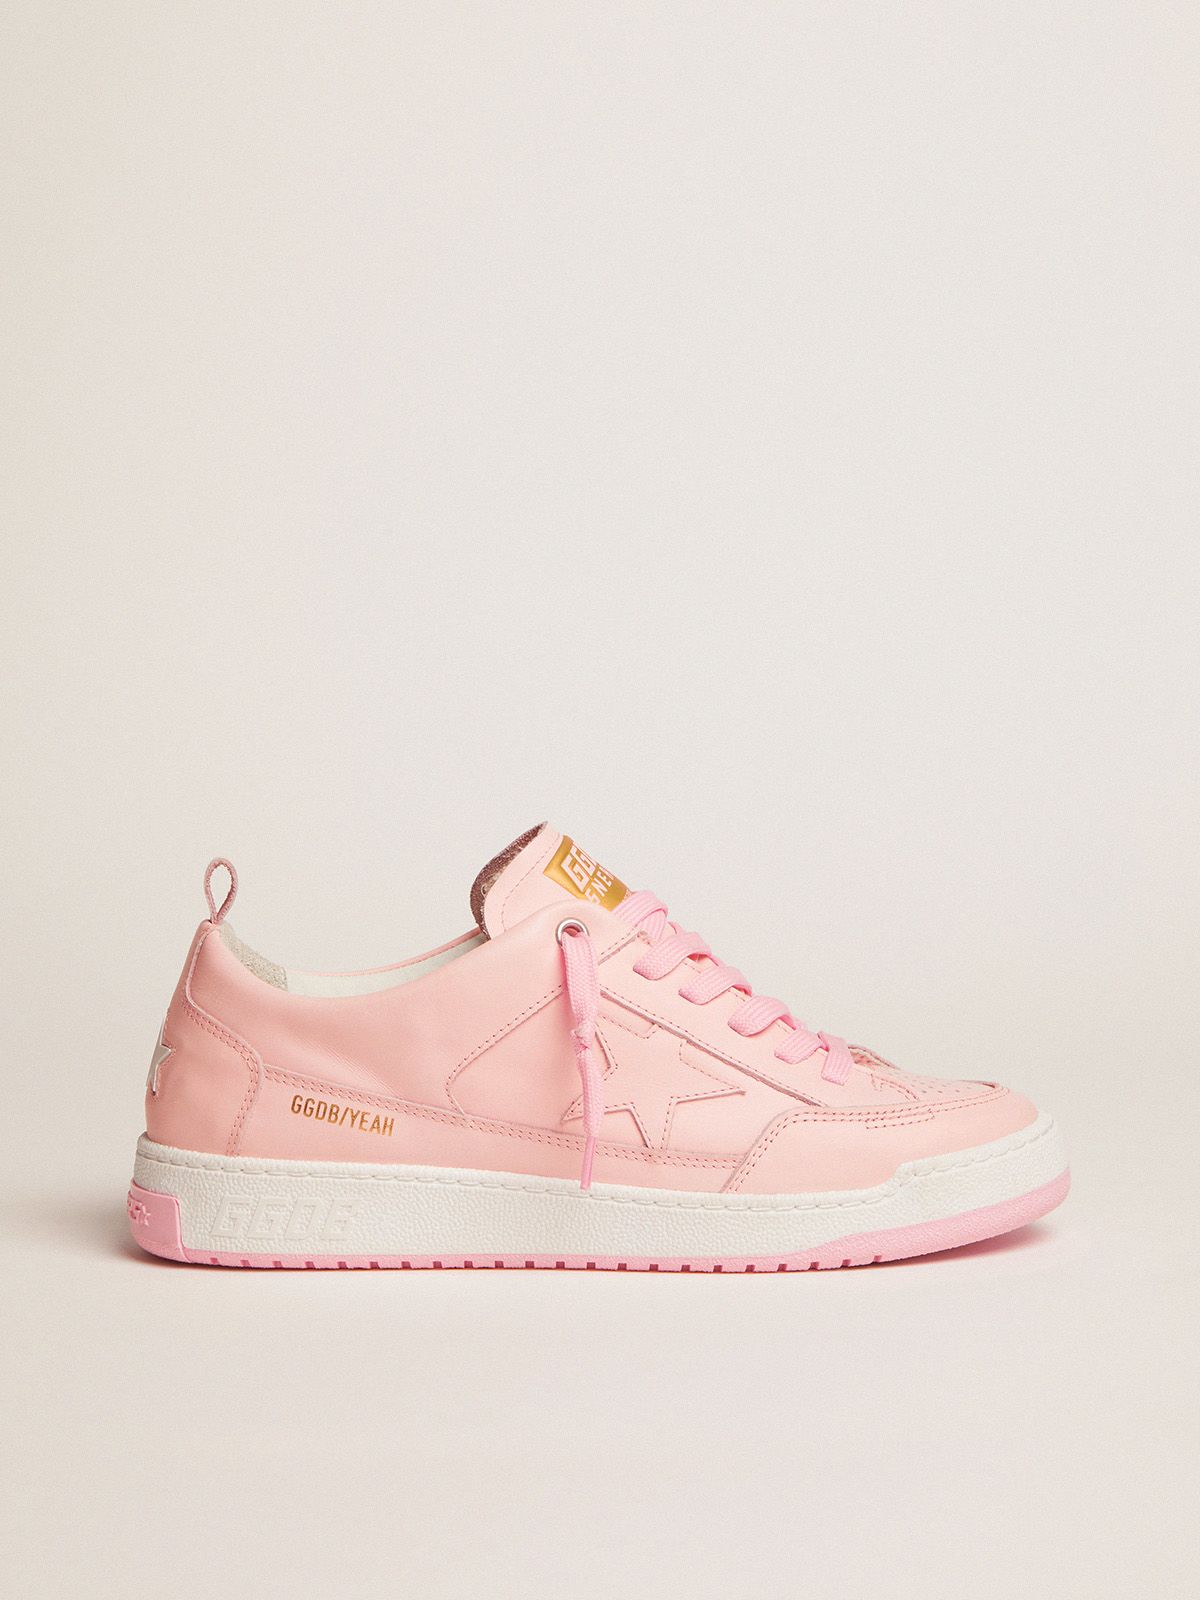 golden goose in leather sneakers Yeah pink pale